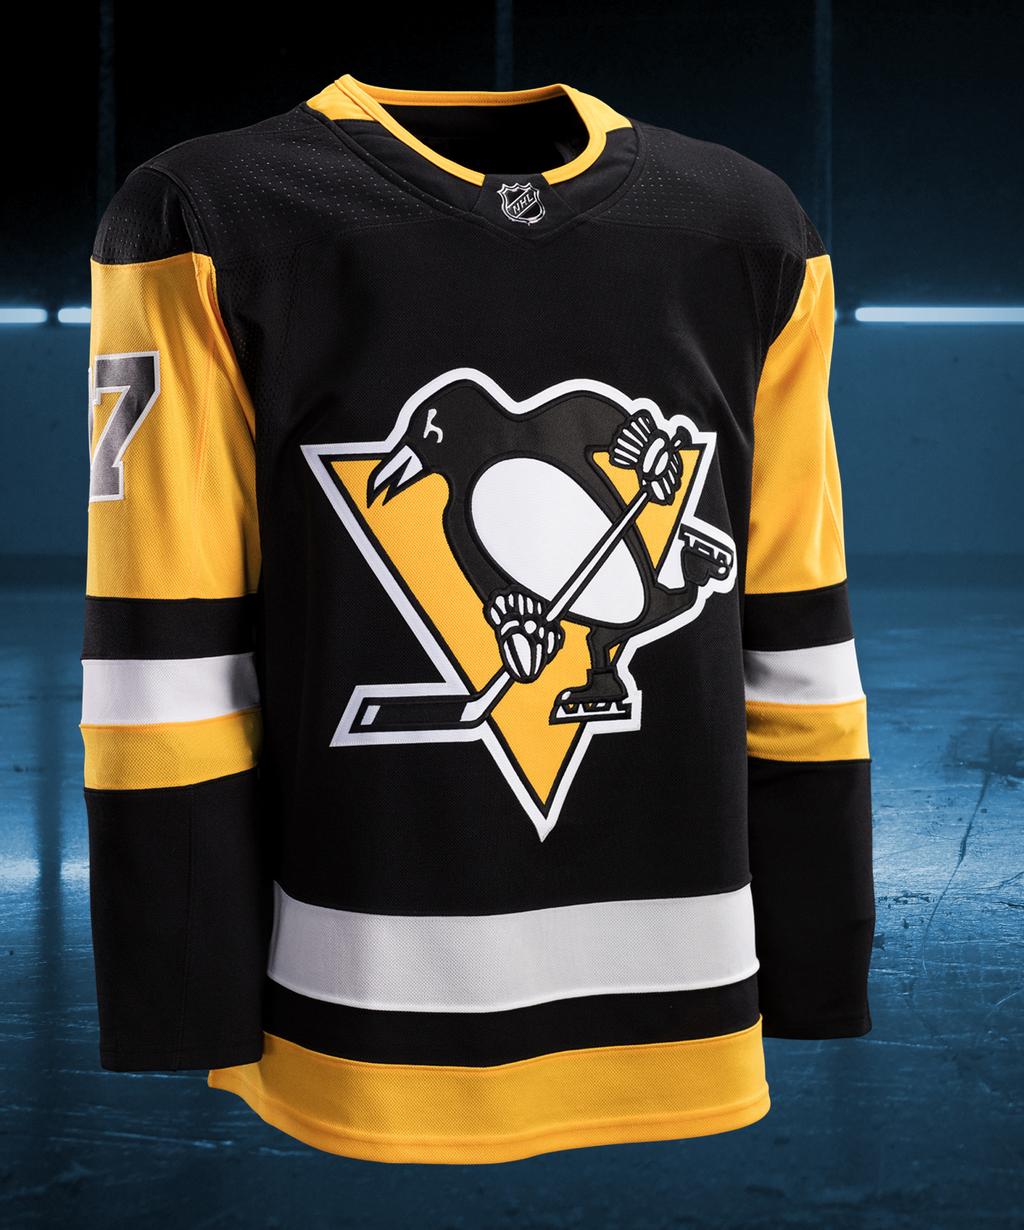 Pittsburgh Penguins on X: On April 20, the Penguins will take the ice in  military green warmup jerseys designed by Zach Aston-Reese who has an  undergraduate degree in graphic design from Northeastern.